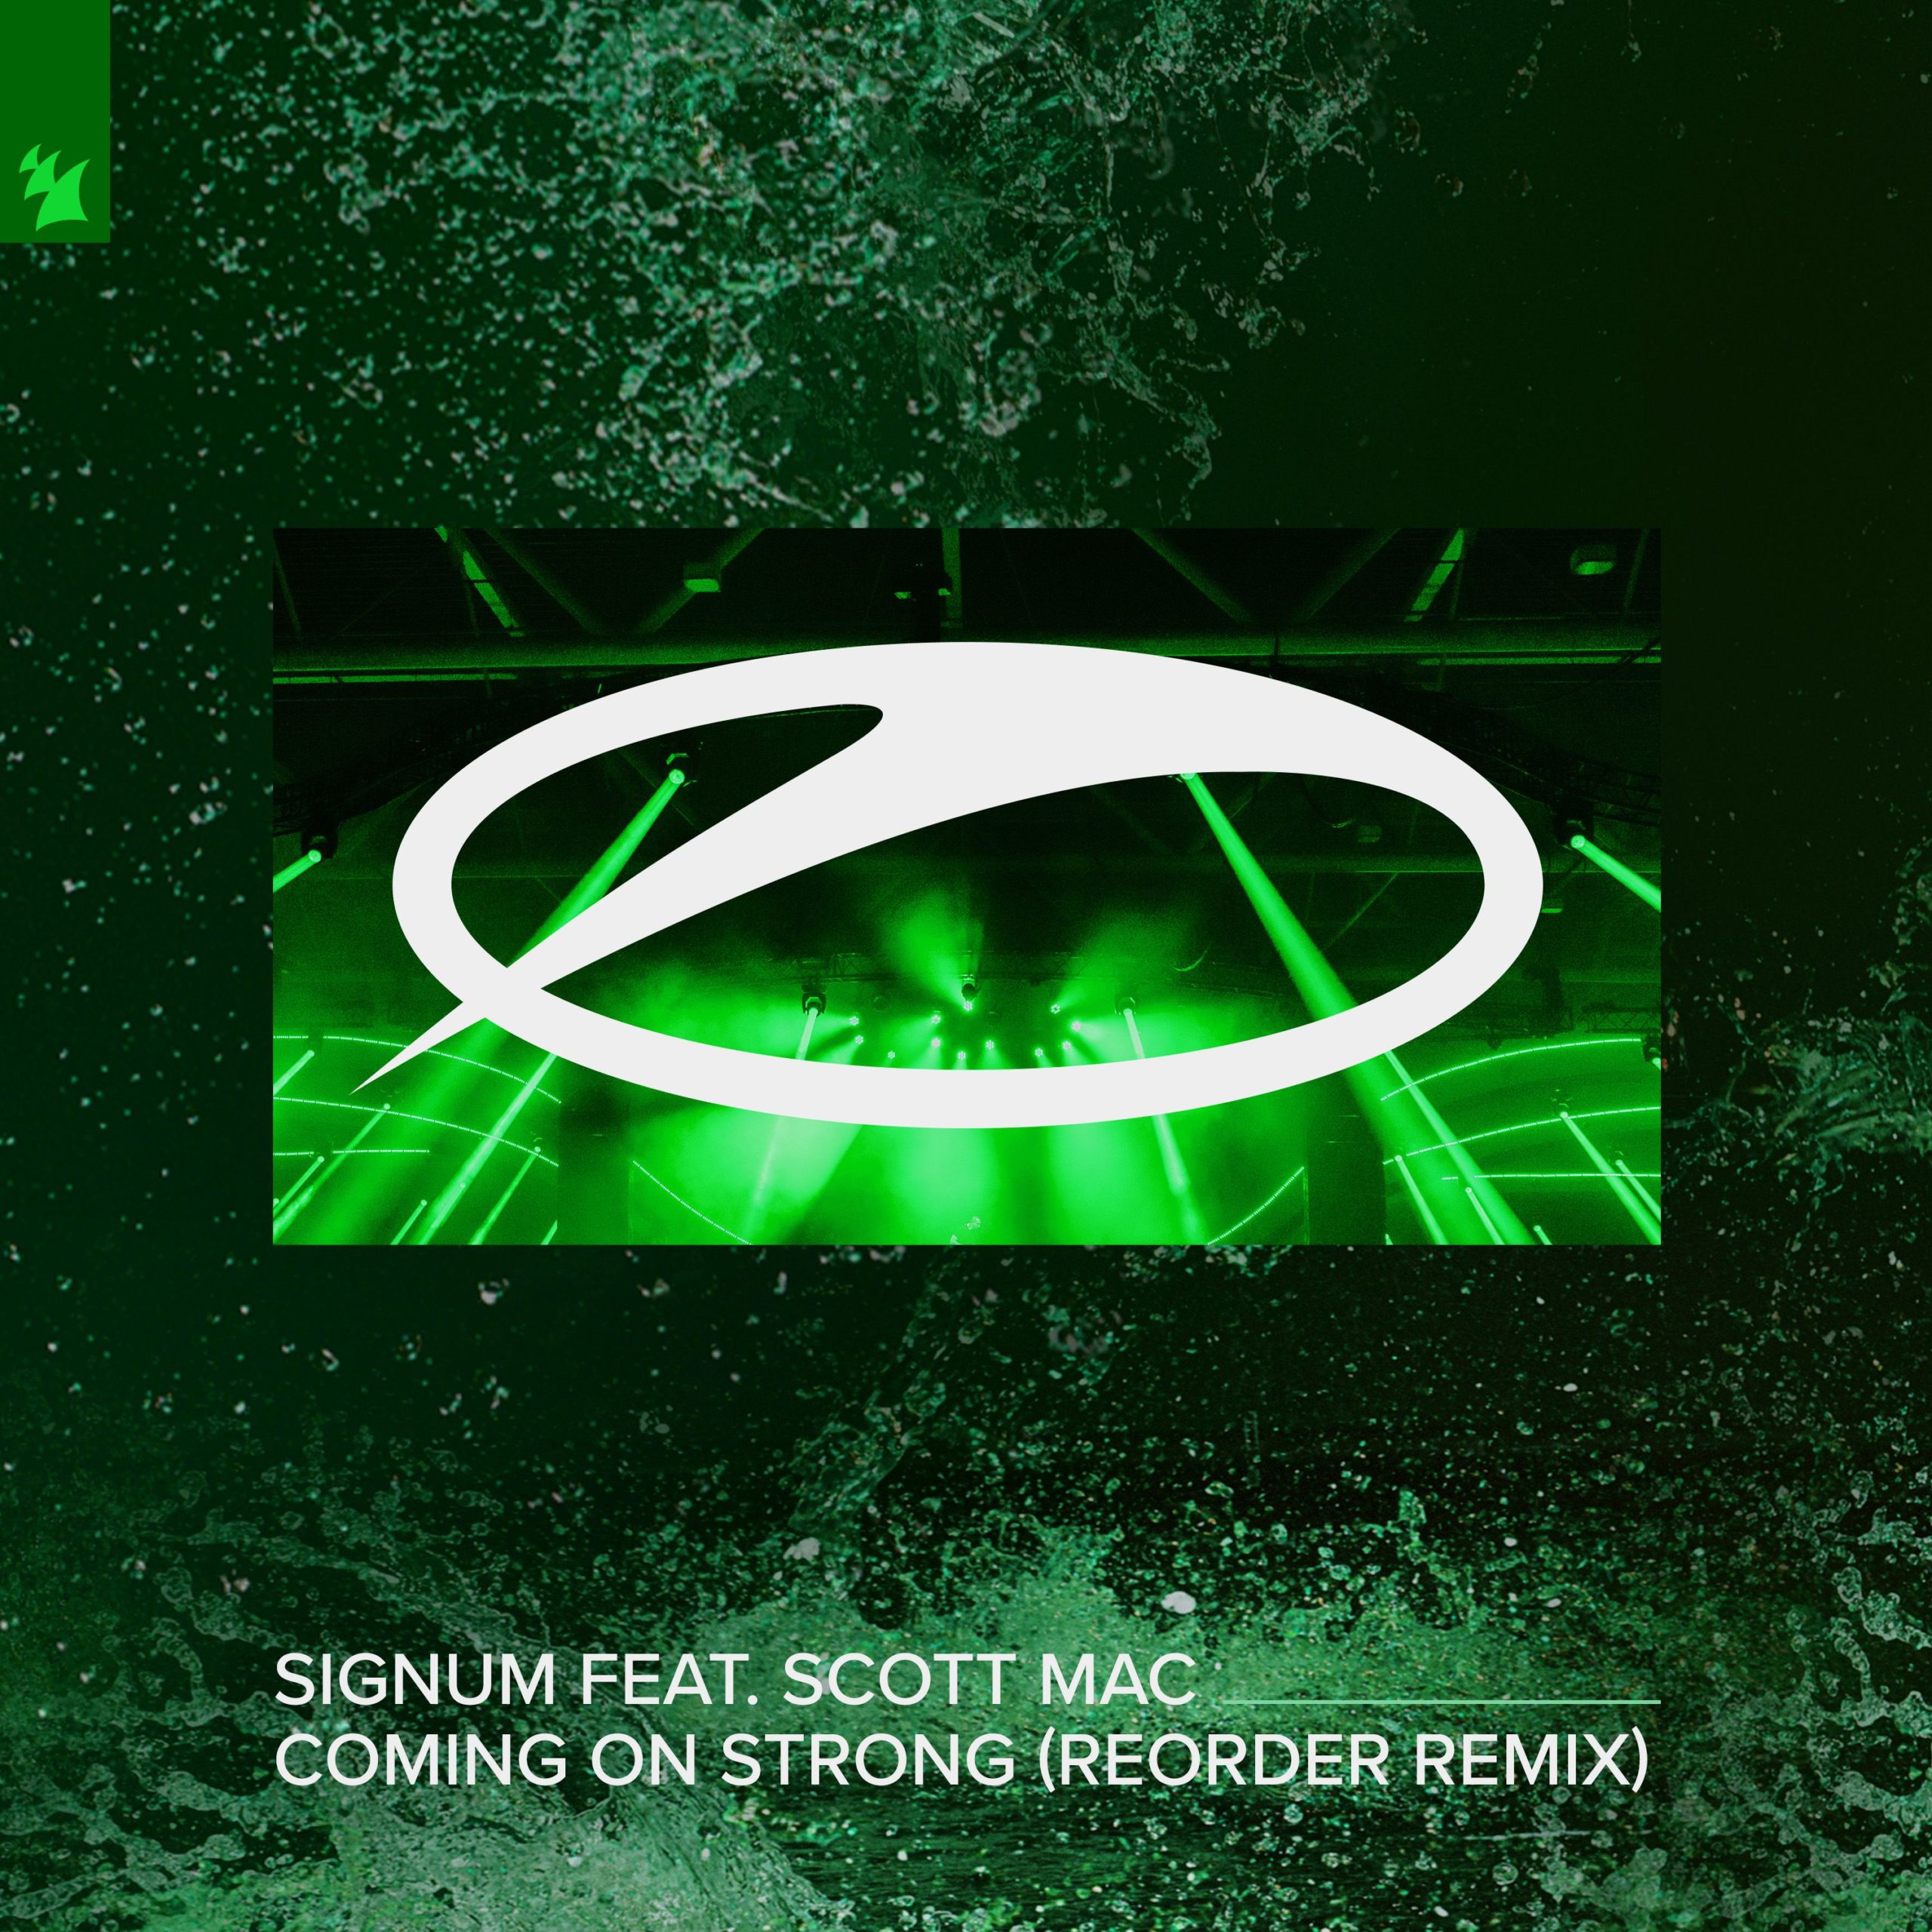 Signum feat. Scott Mac presents Coming On Strong (Re-Order Remix) on A State Of Trance